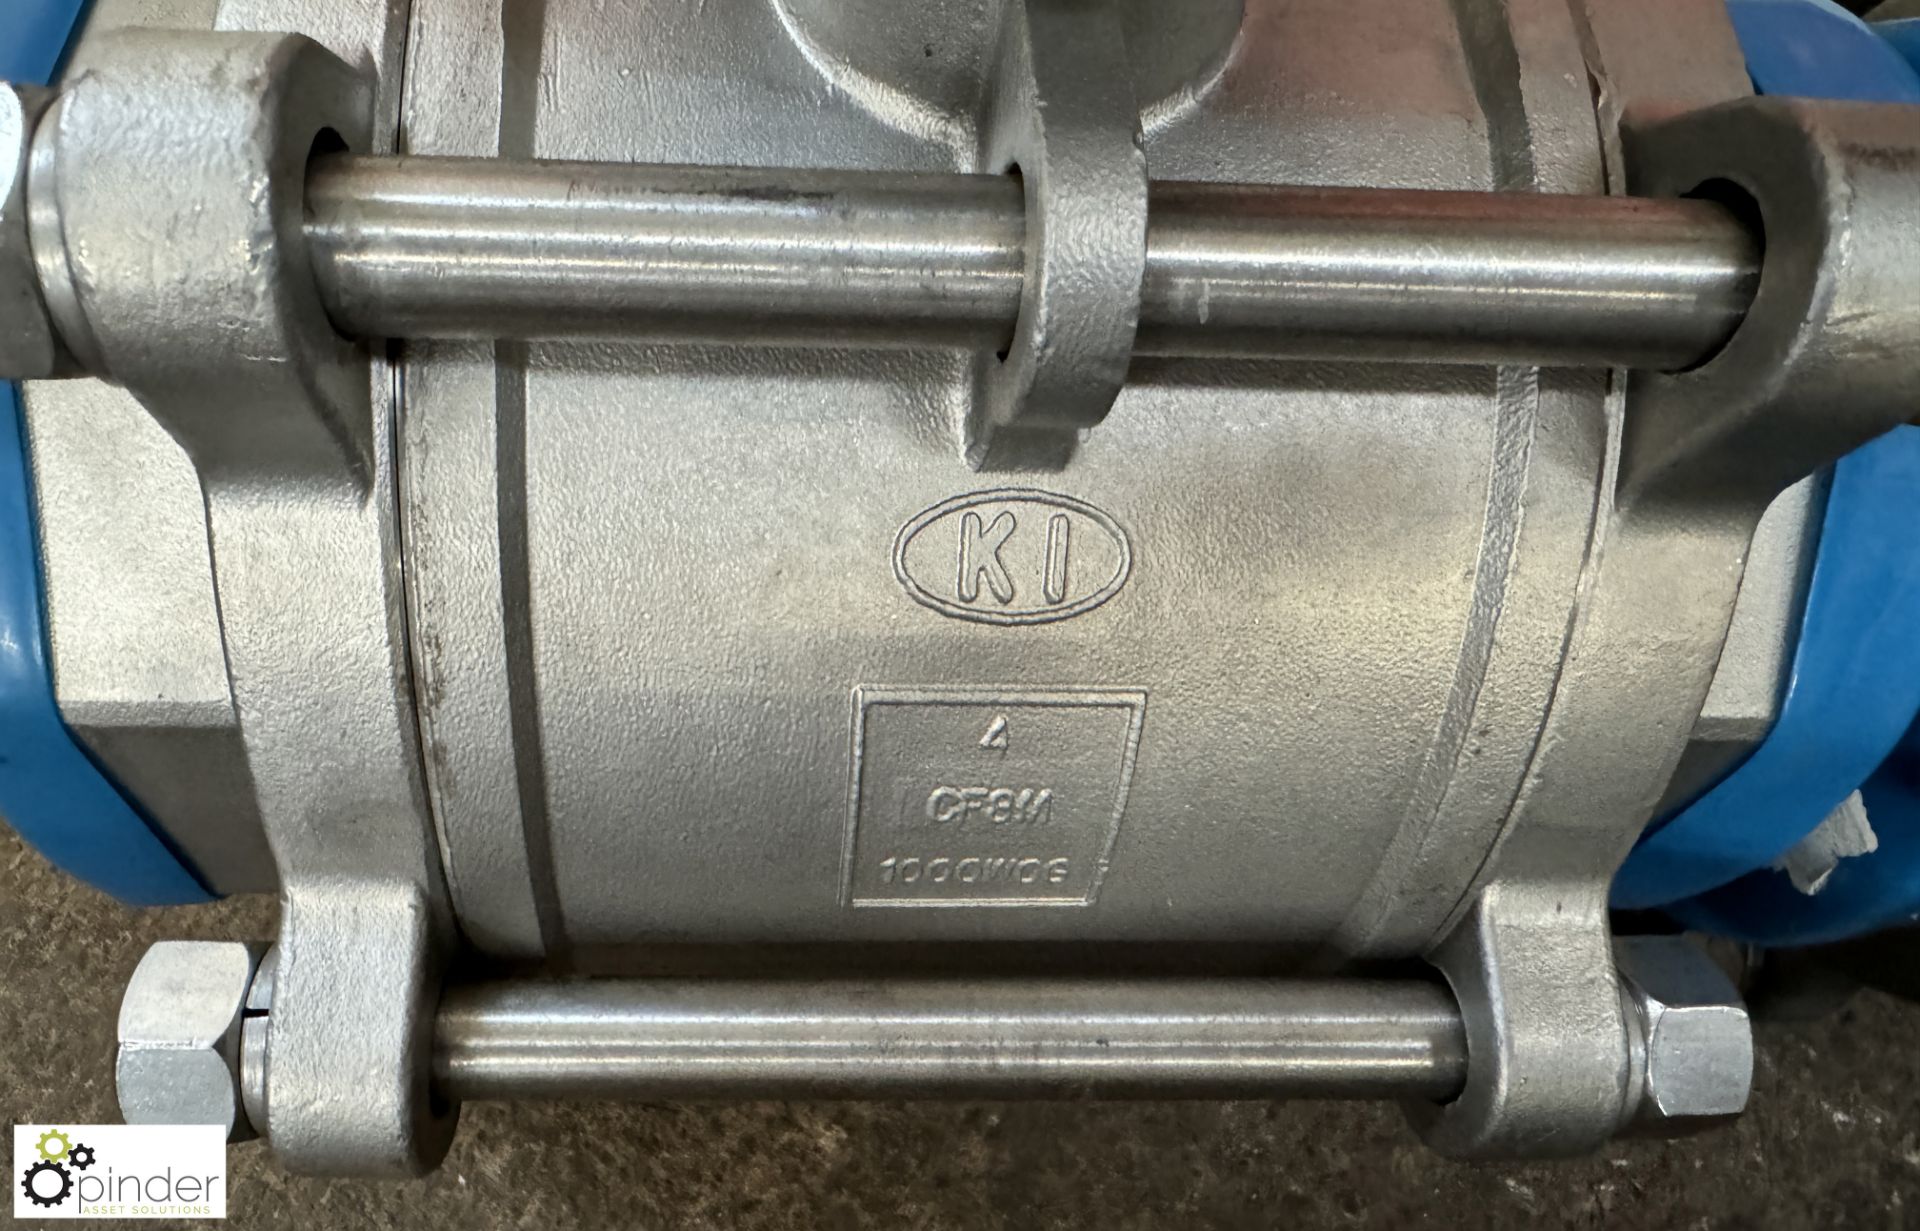 2 KI 4CF8M Ball Valves, 4in, unused (LOCATION: Nottingham – collection Monday 18 March and Tuesday - Image 2 of 6